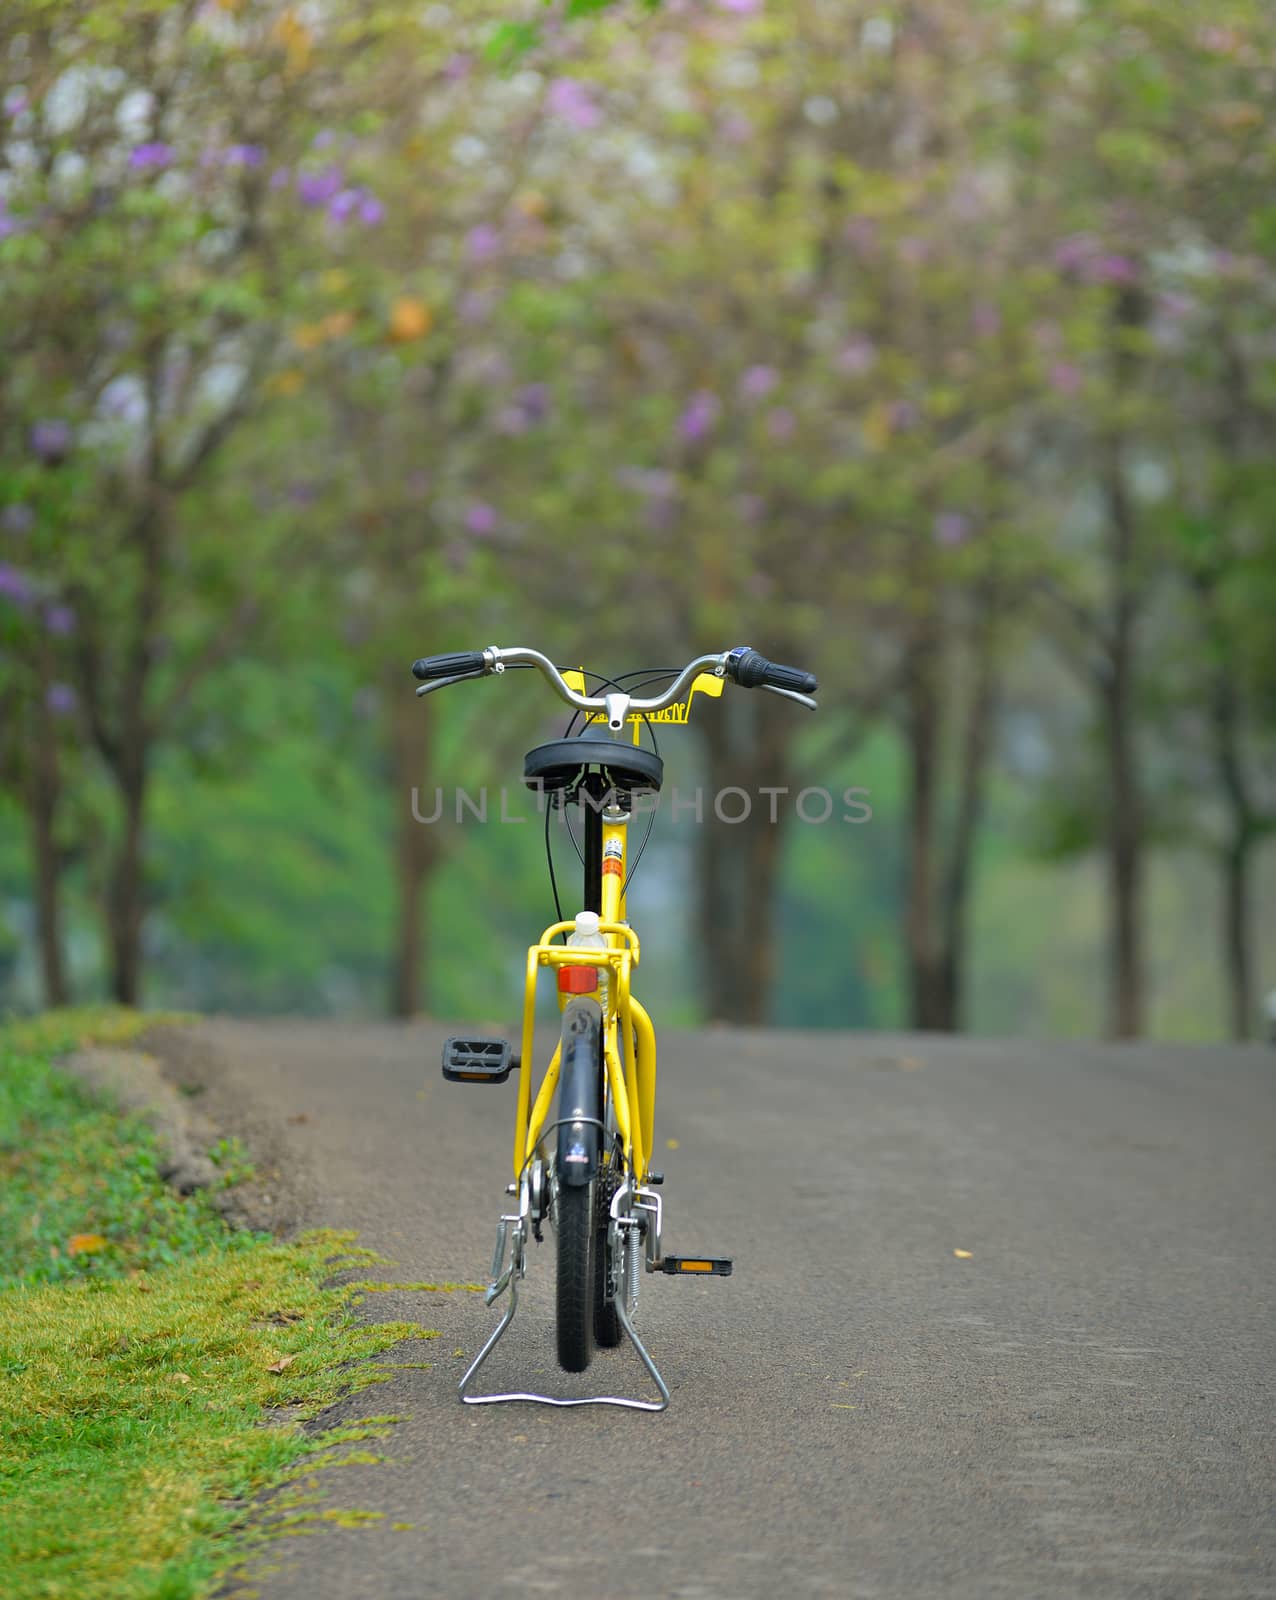  bicycle in the garden road  by sommai